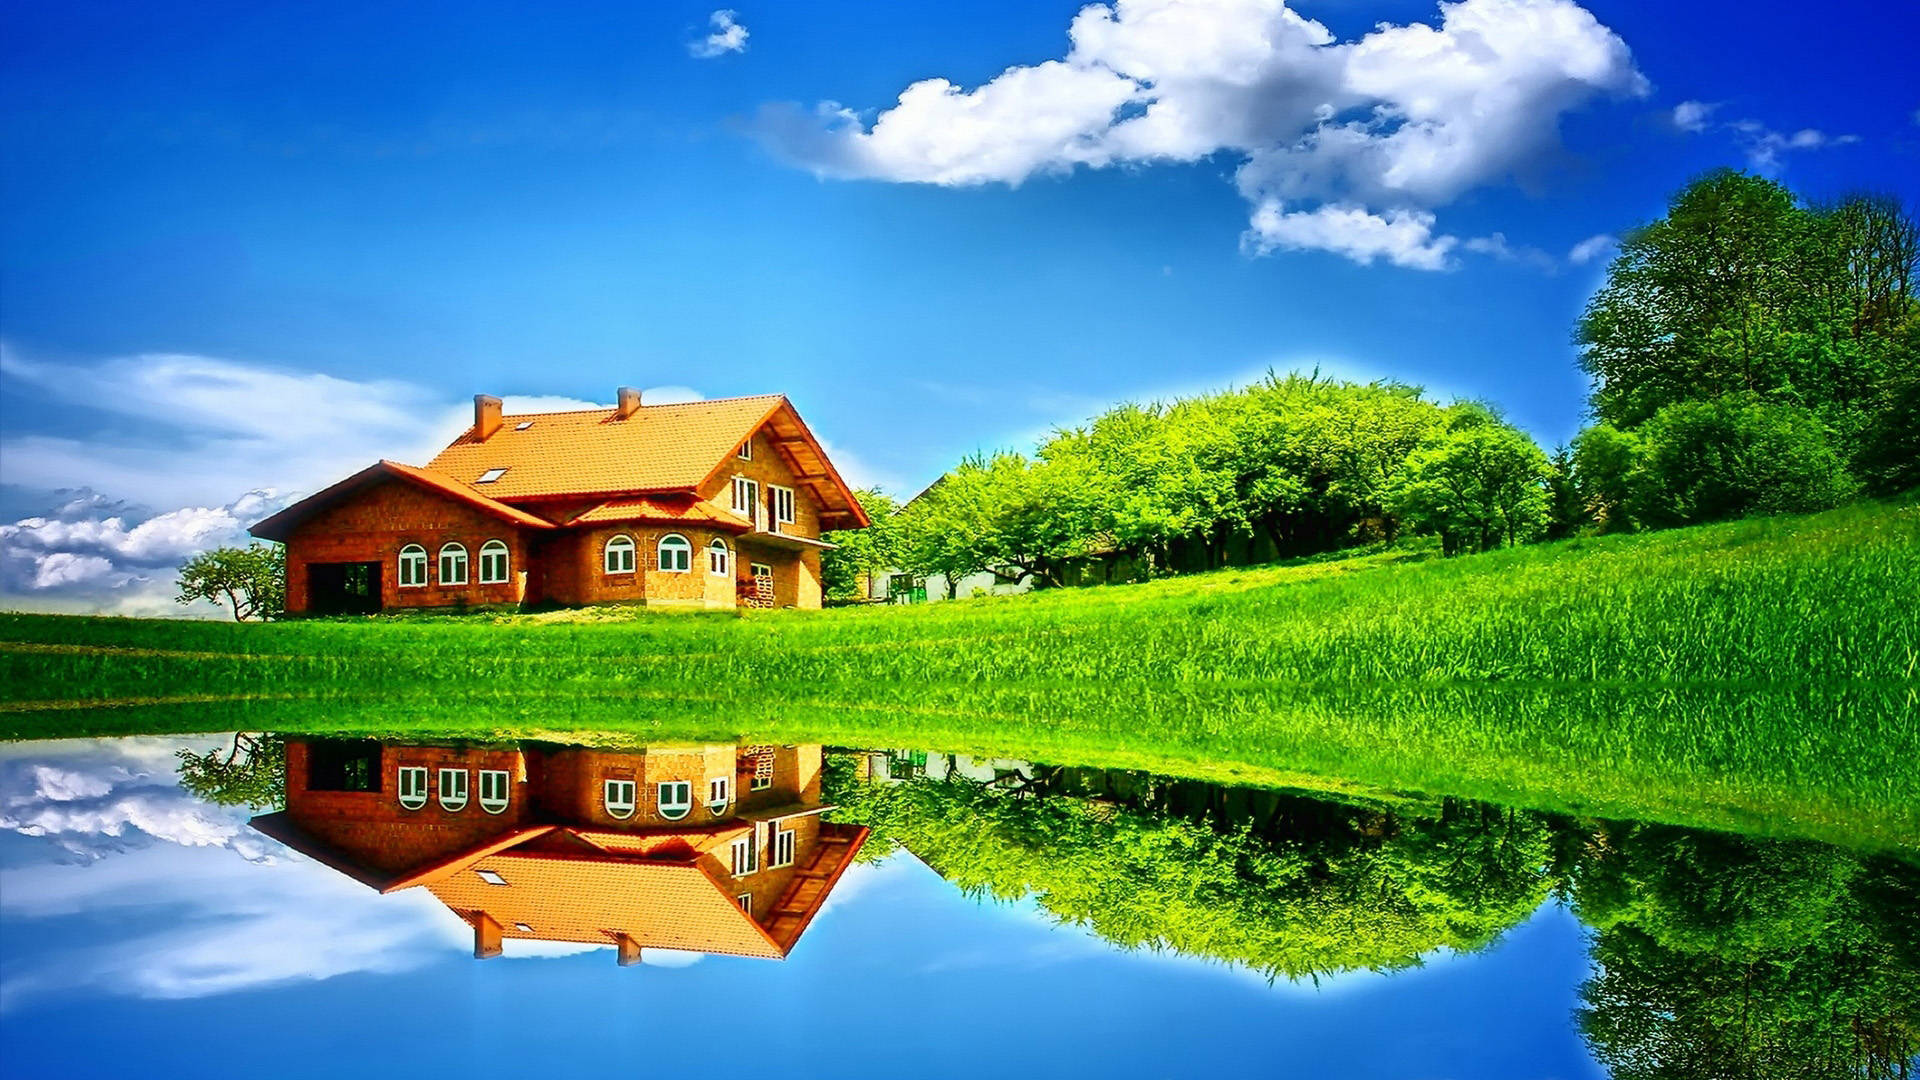 Yellow House And Greenery Best Hd